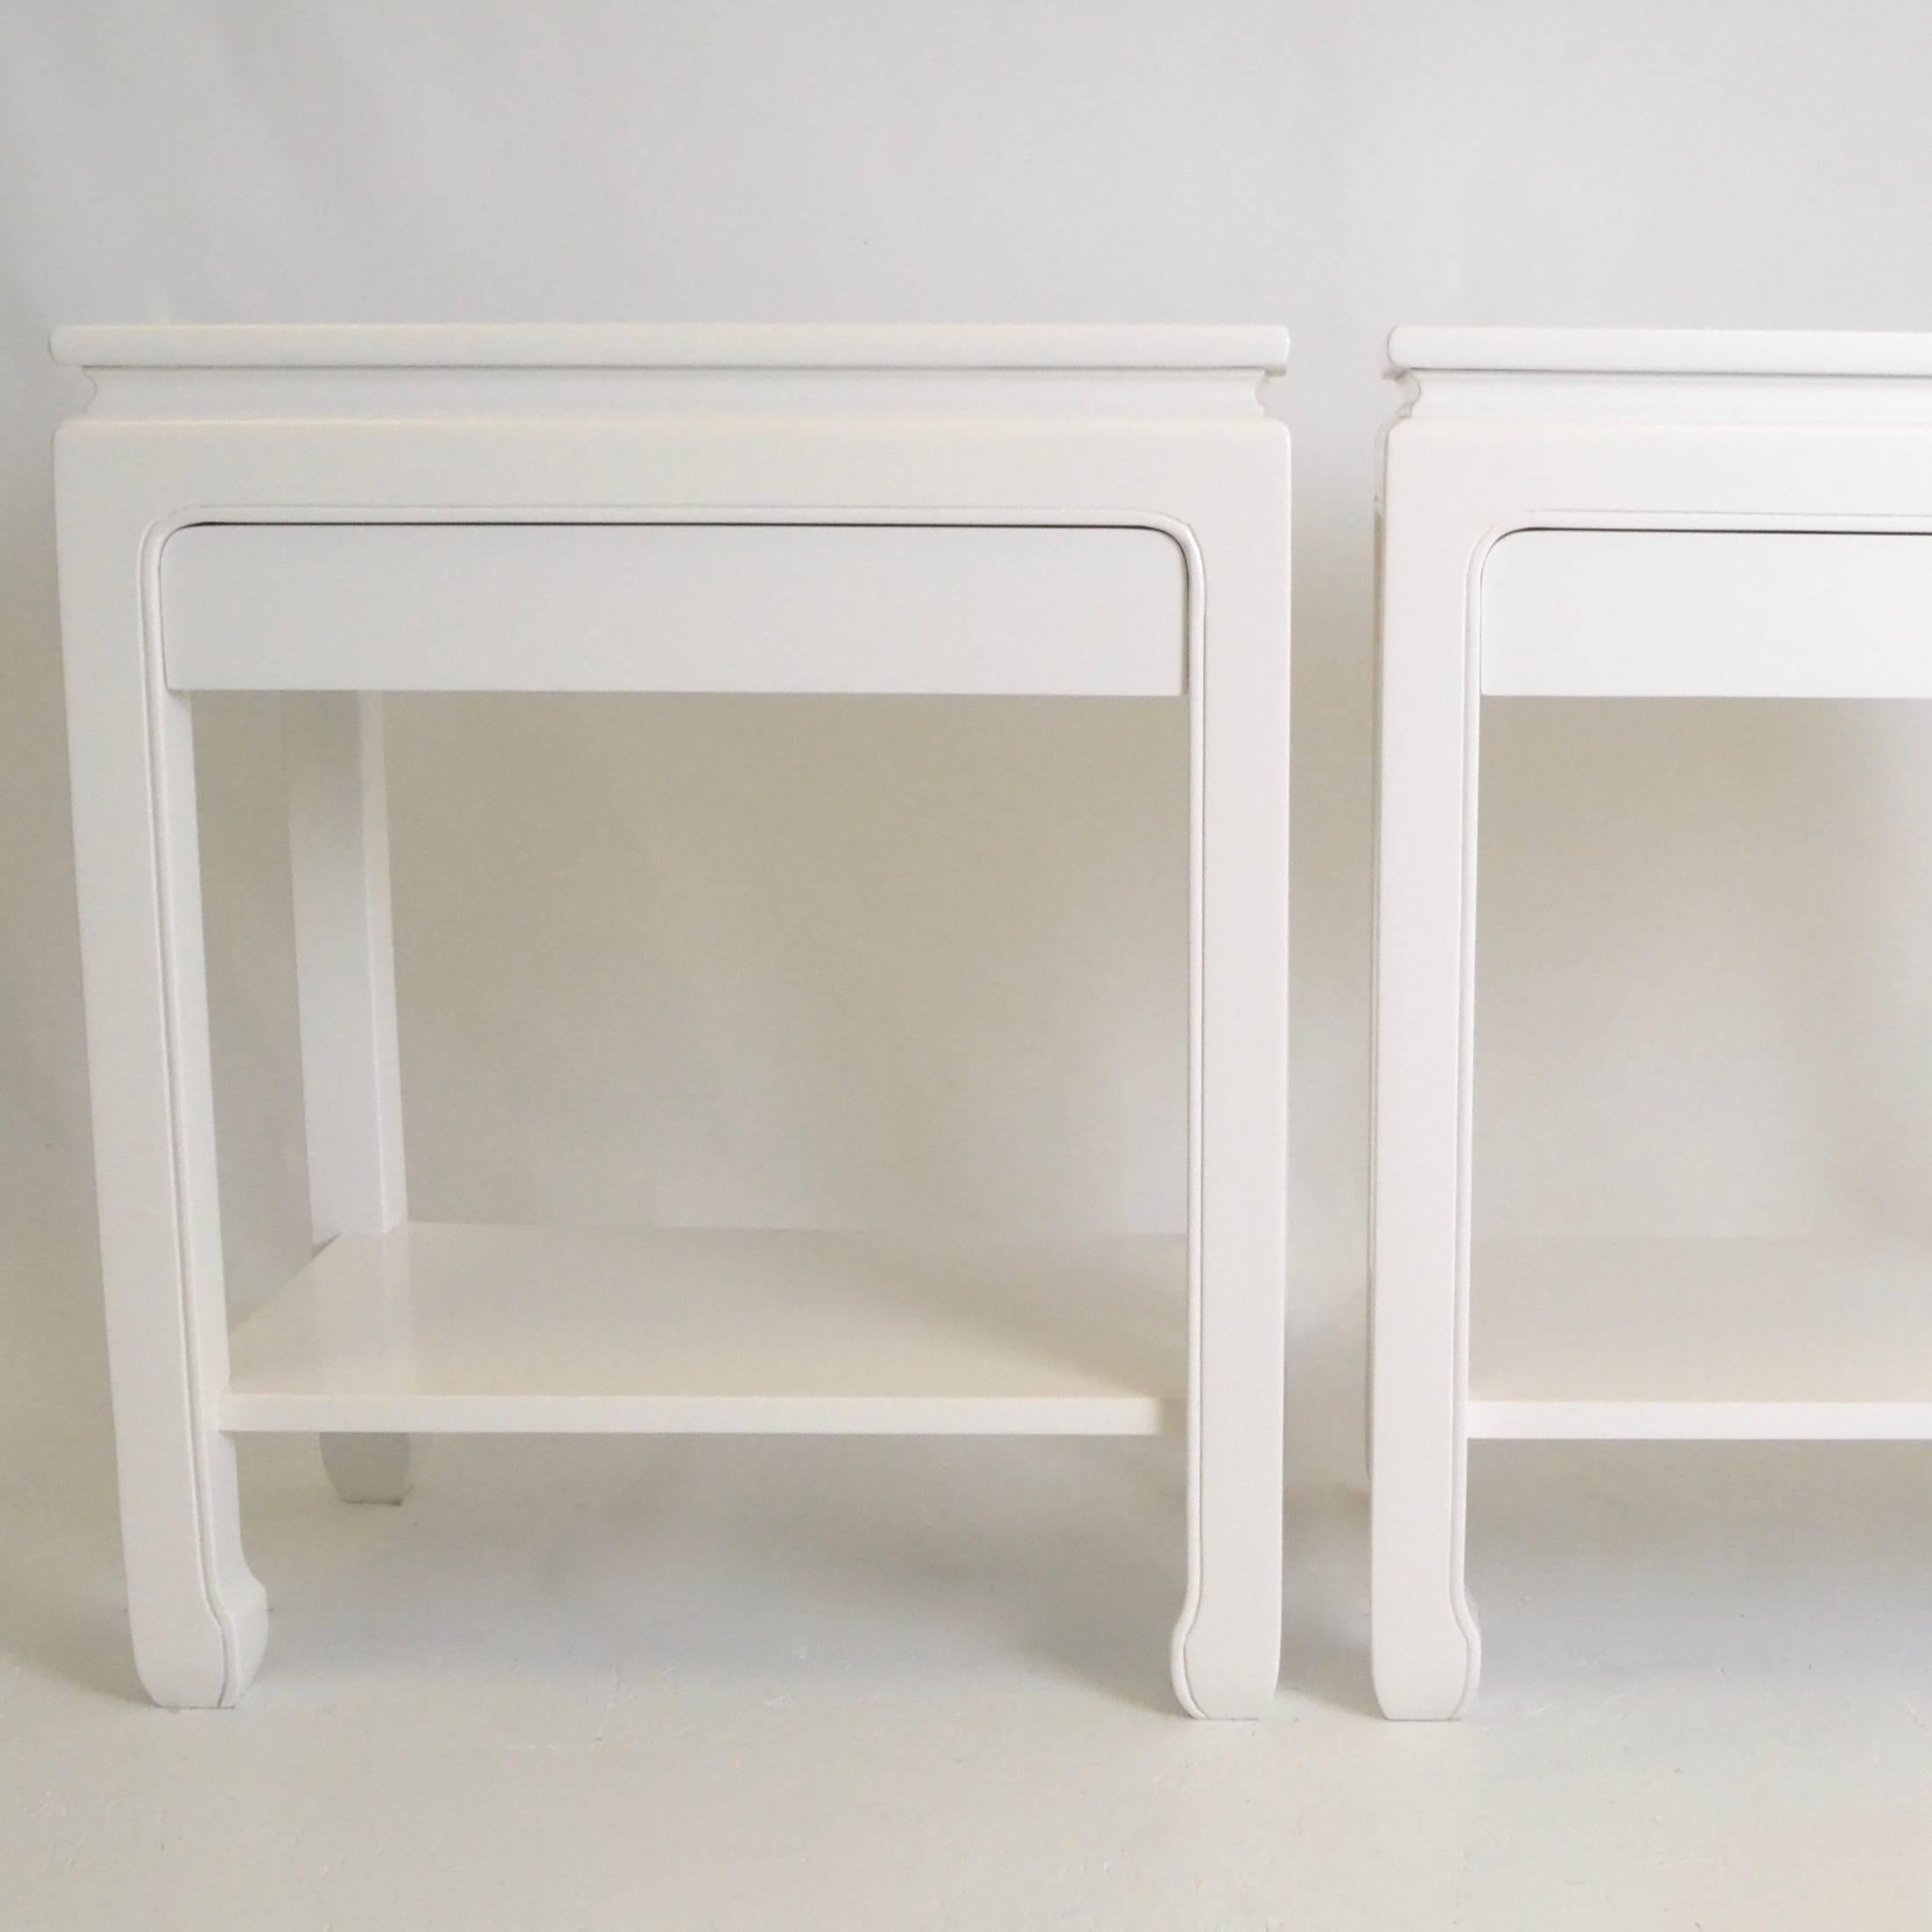 A very handsome pair of end tables or nightstands, each with a single drawer and lower shelf. Oriental styling. Newly lacquered in sating dove white.